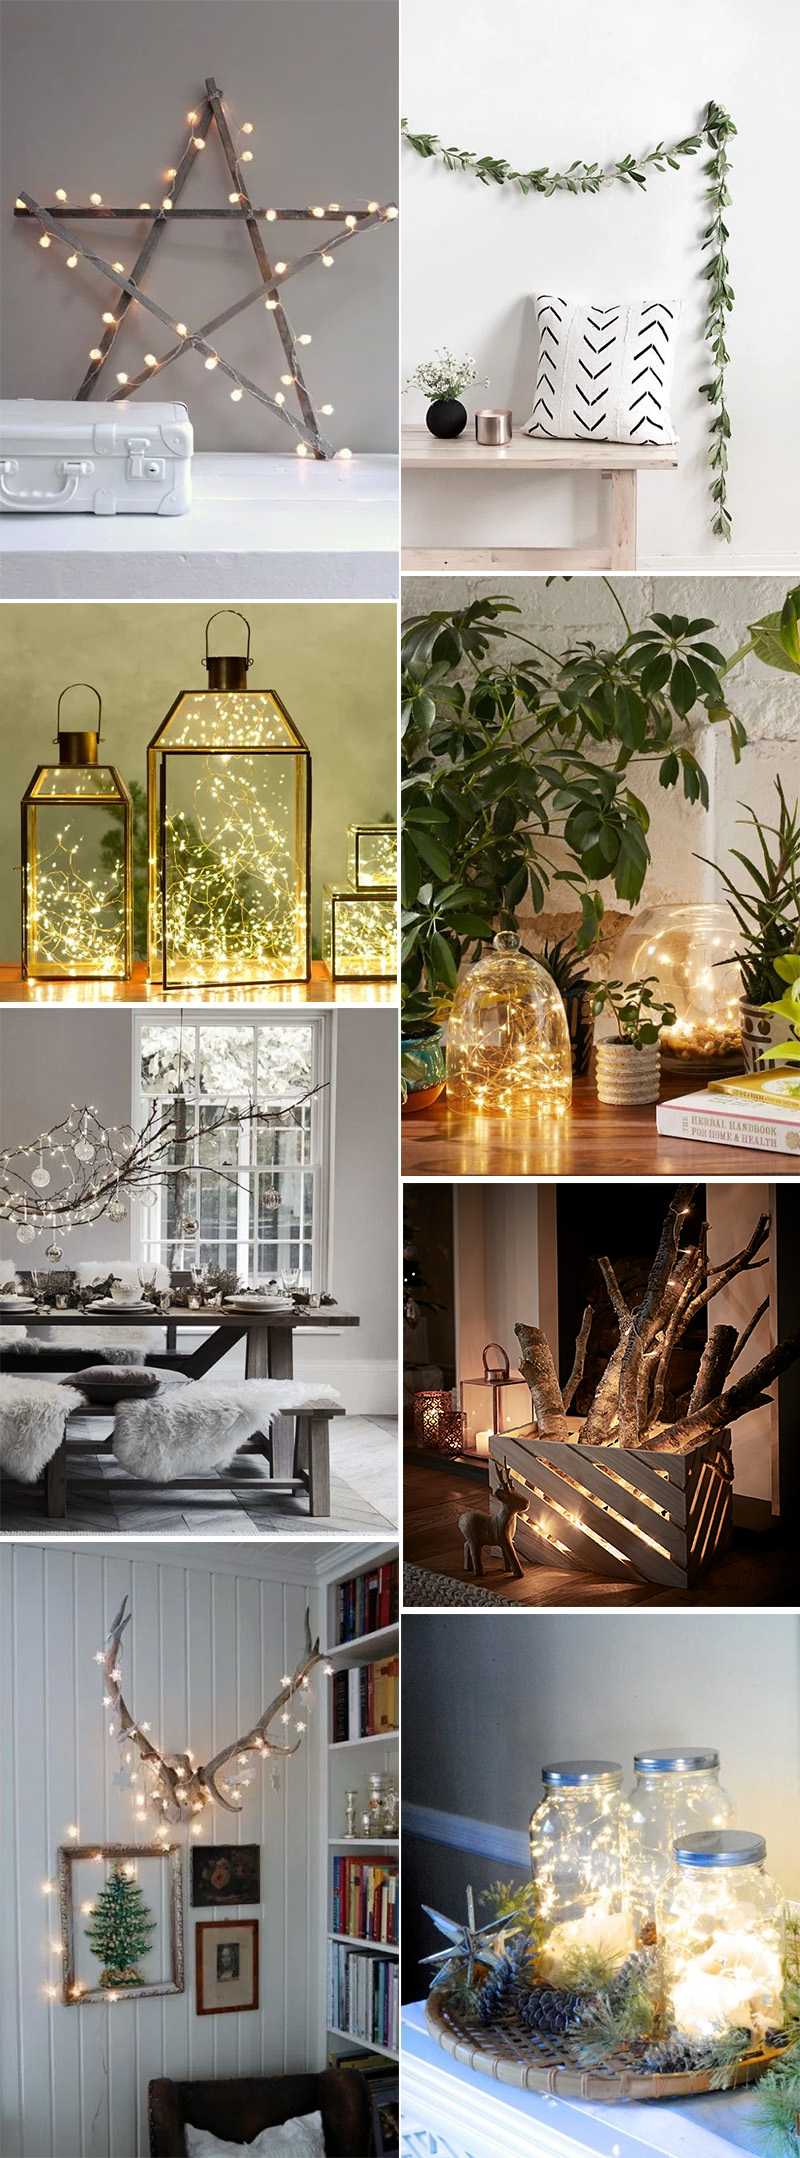 Simple holiday decor with white lights